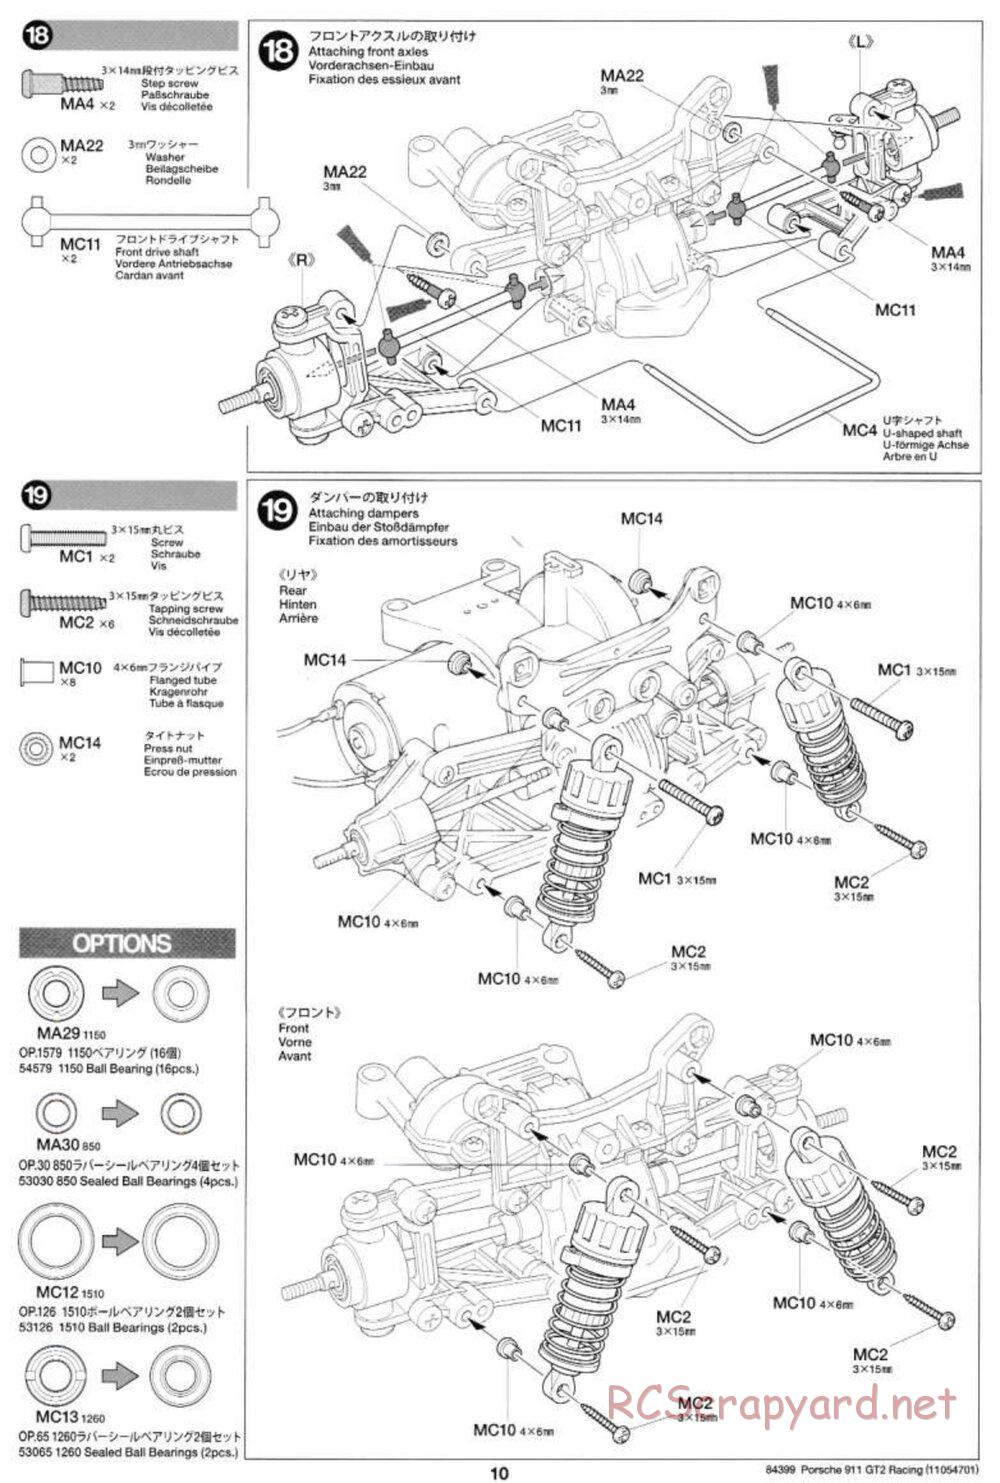 Tamiya - Porsche 911 GT2 Racing - TA-02SW Chassis - Manual - Page 10